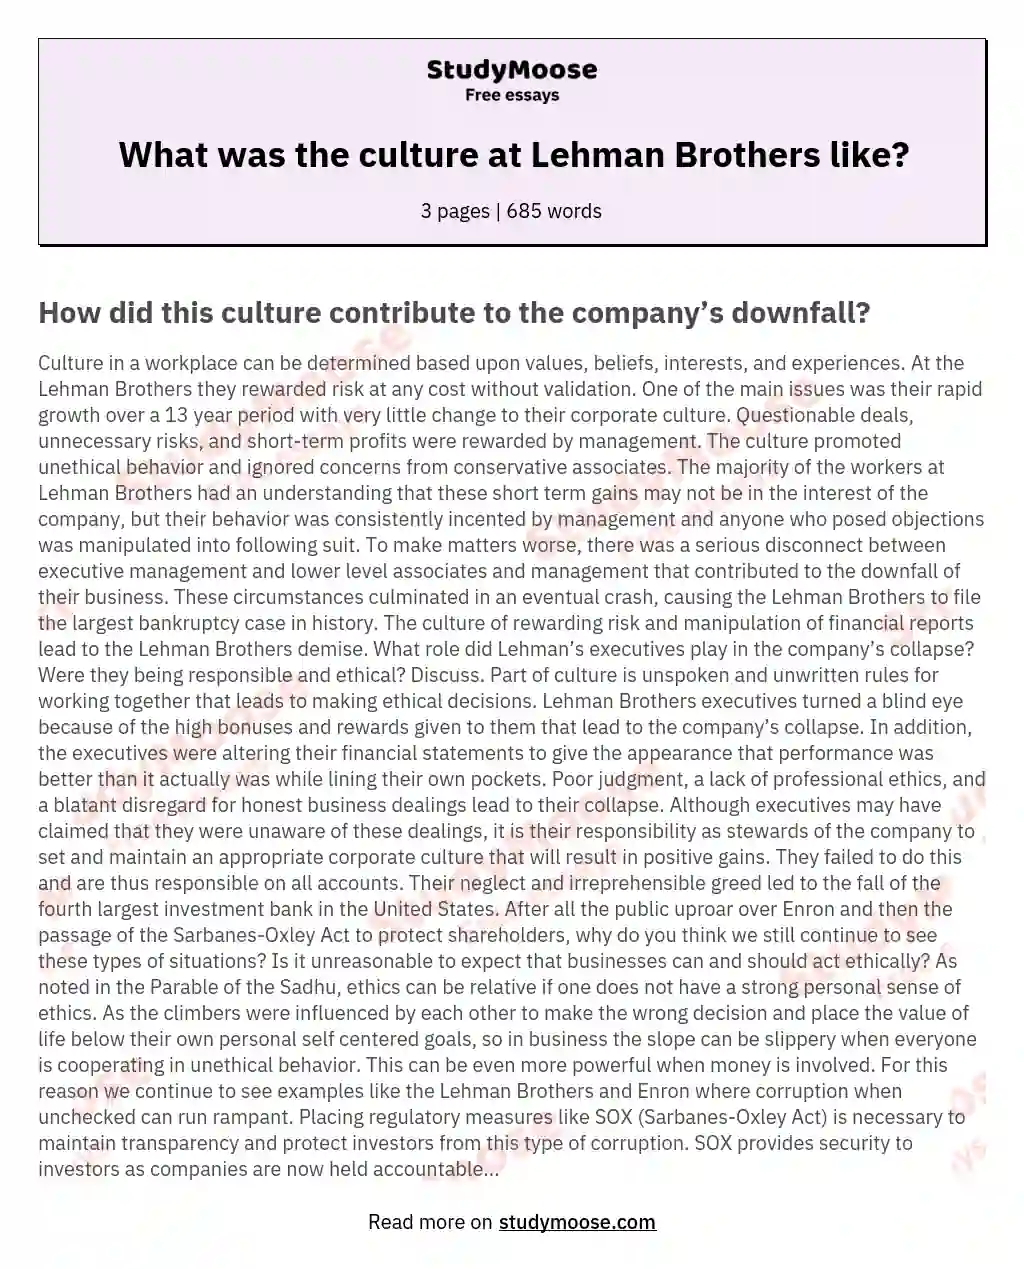 What was the culture at Lehman Brothers like? essay